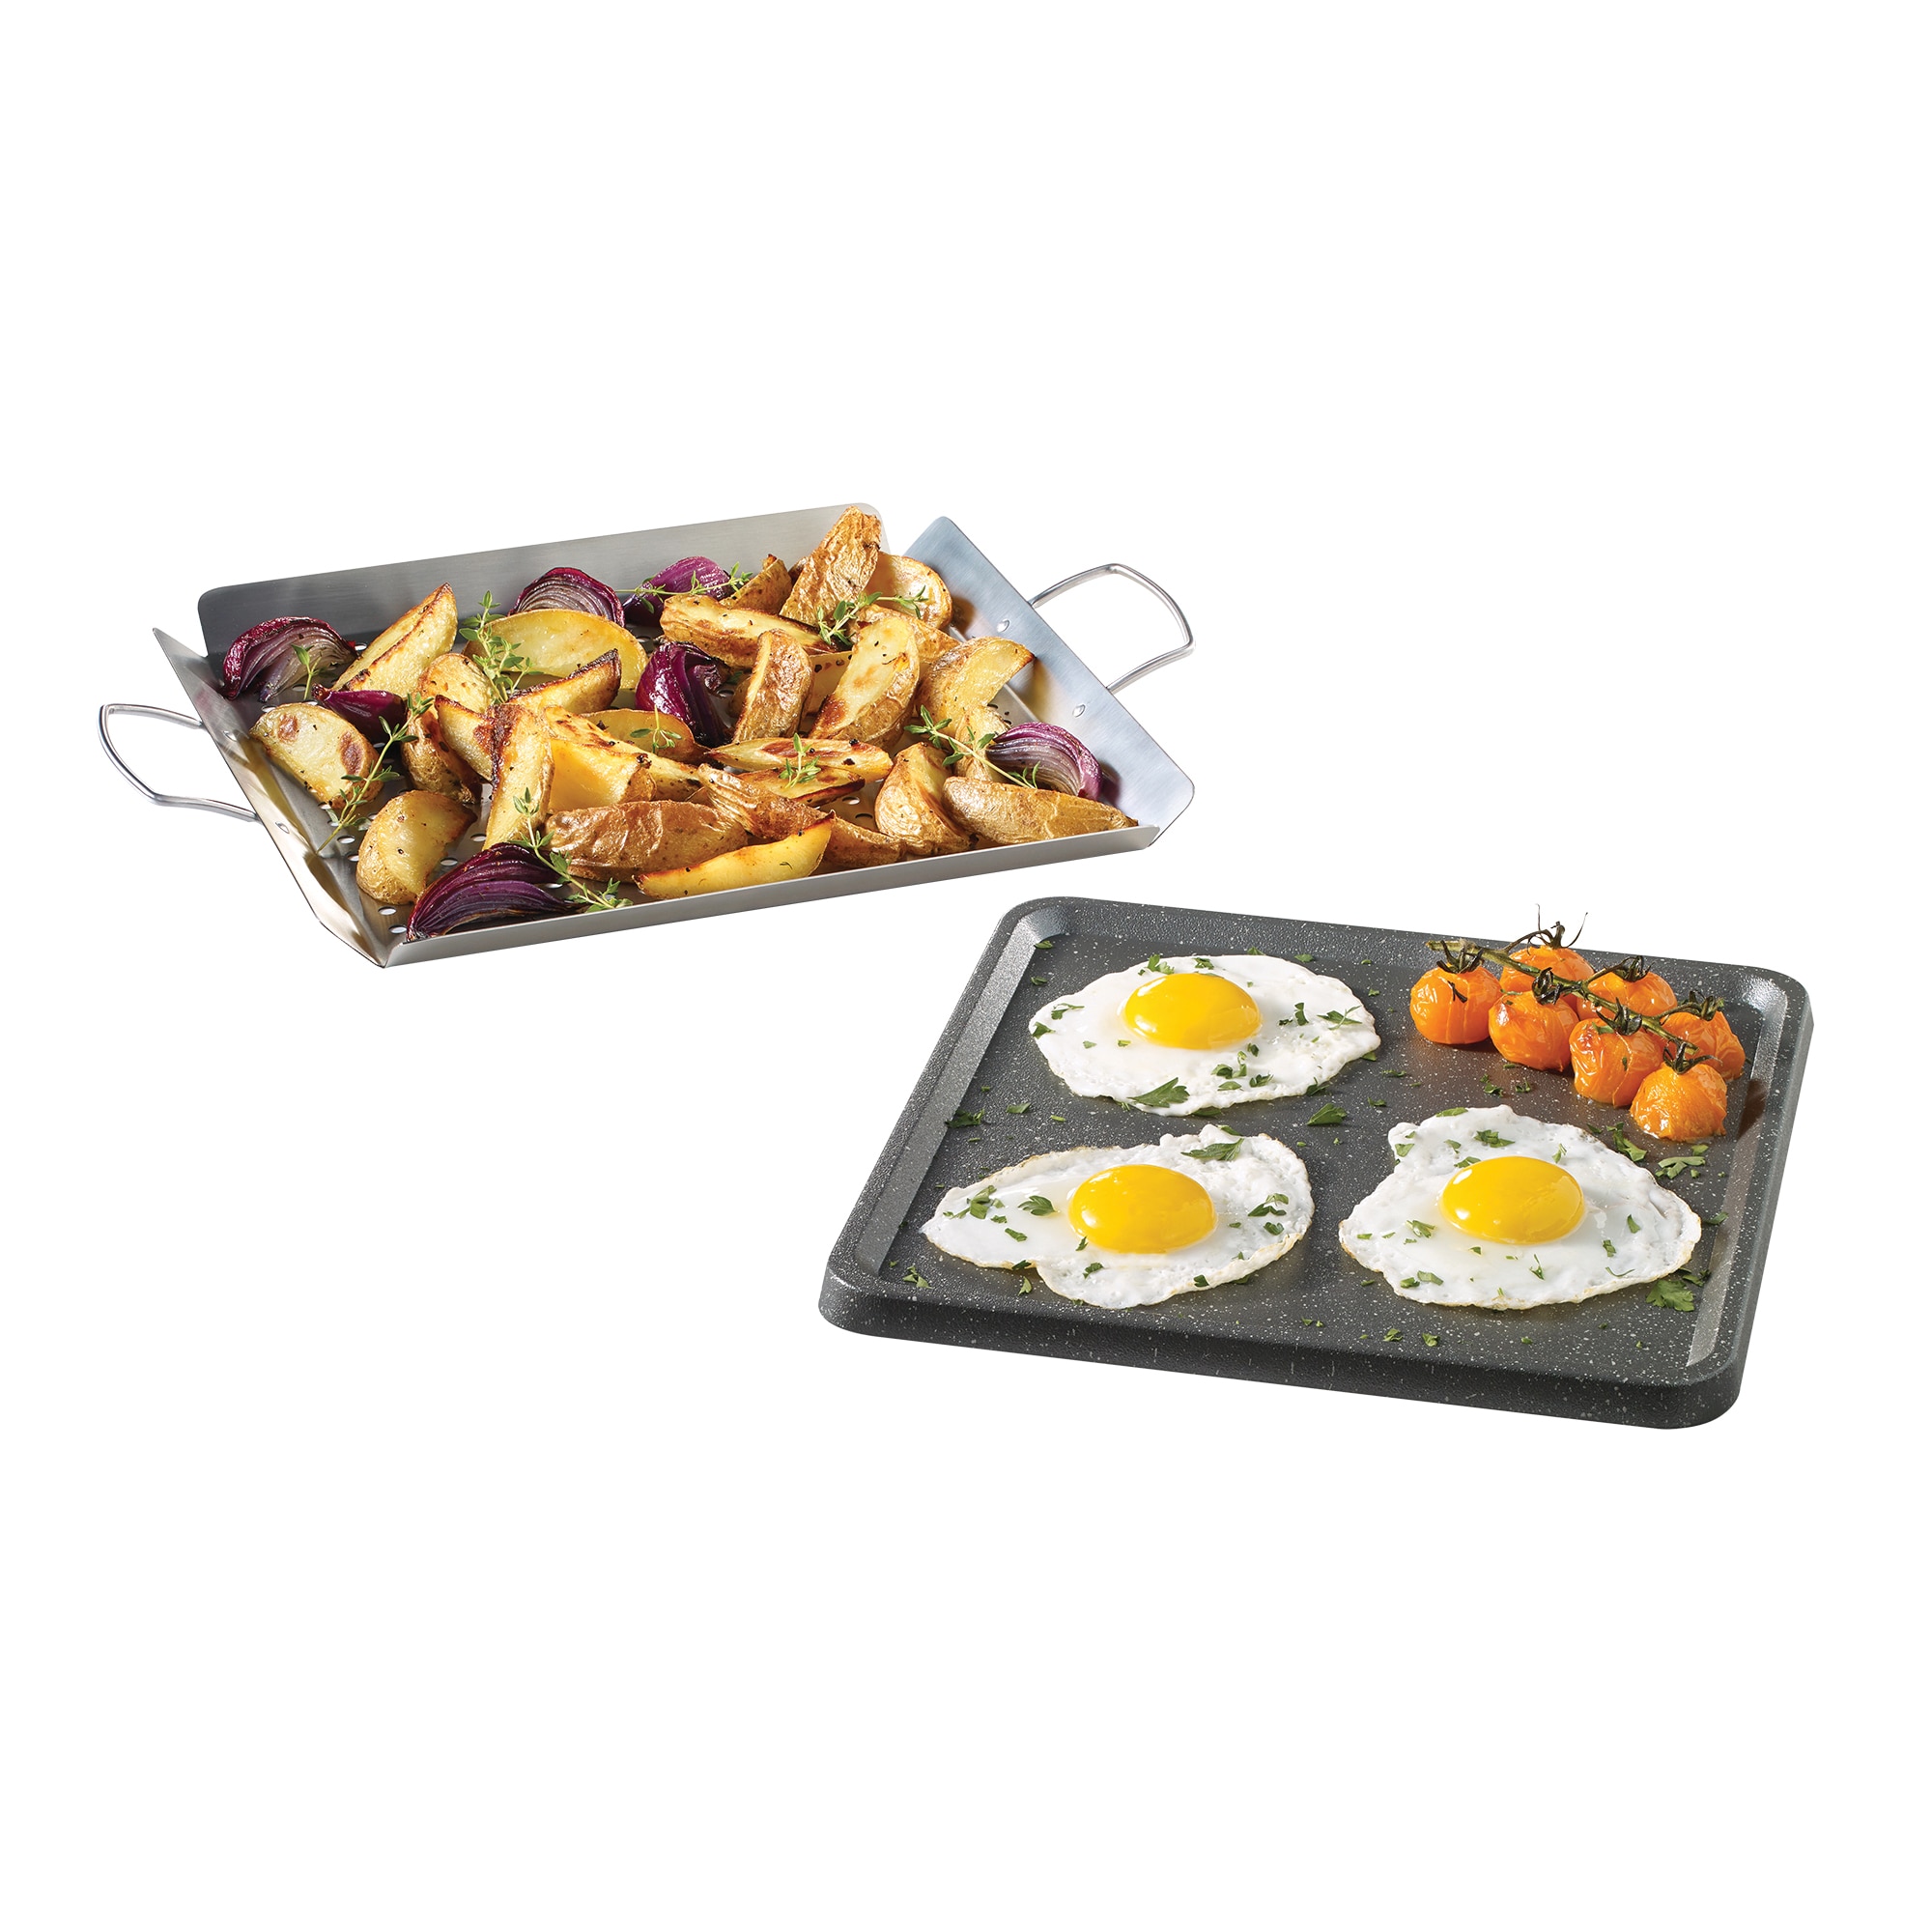 Starfrit RA43087 The Rock Grill & Griddle, 1 - Fry's Food Stores